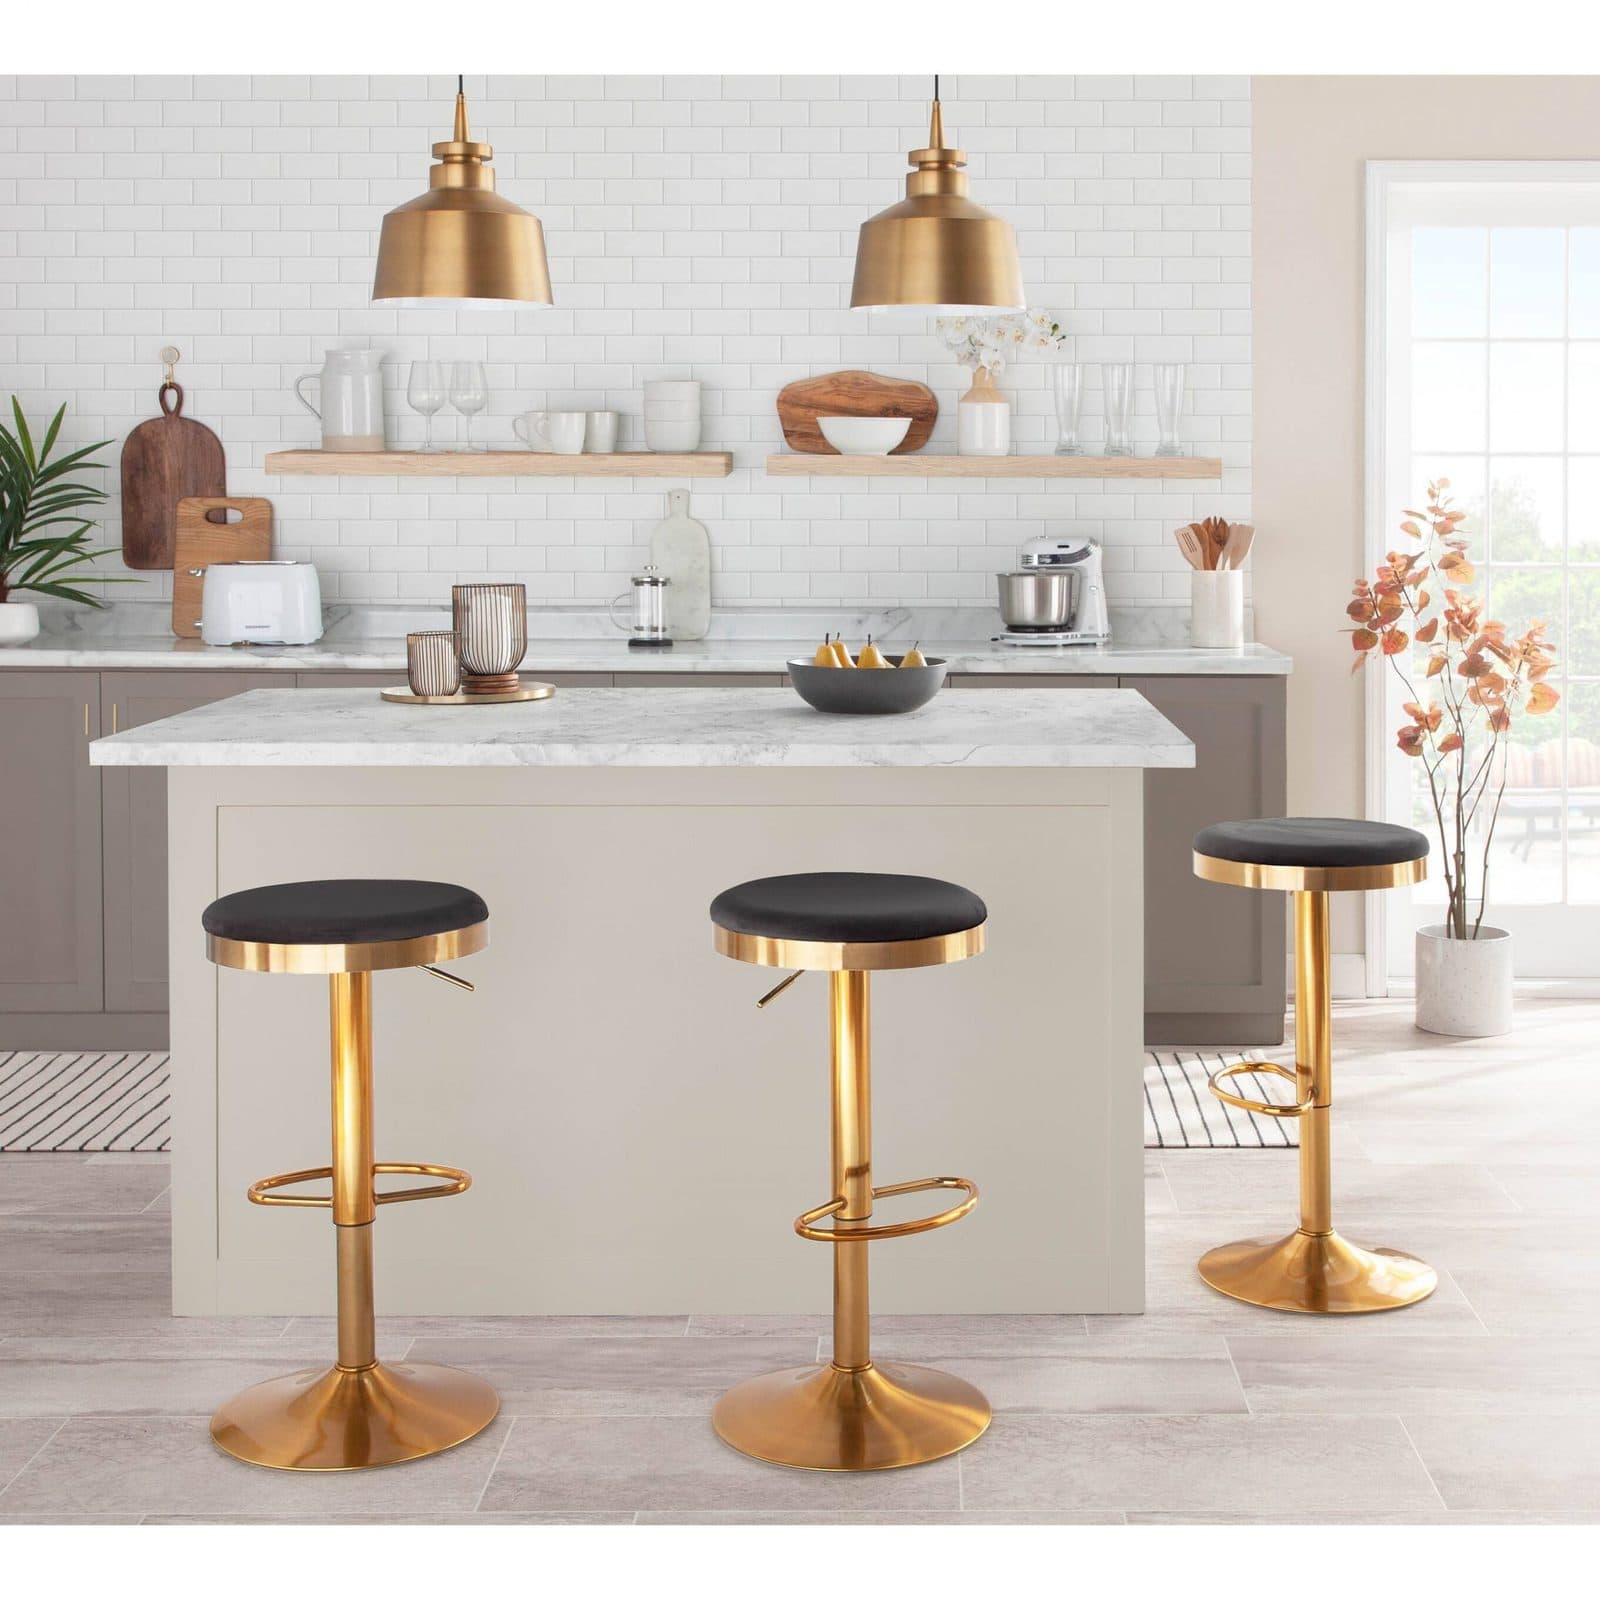 15 Best Stools For Kitchen Island, Kitchen Island With Bar Stool Seating